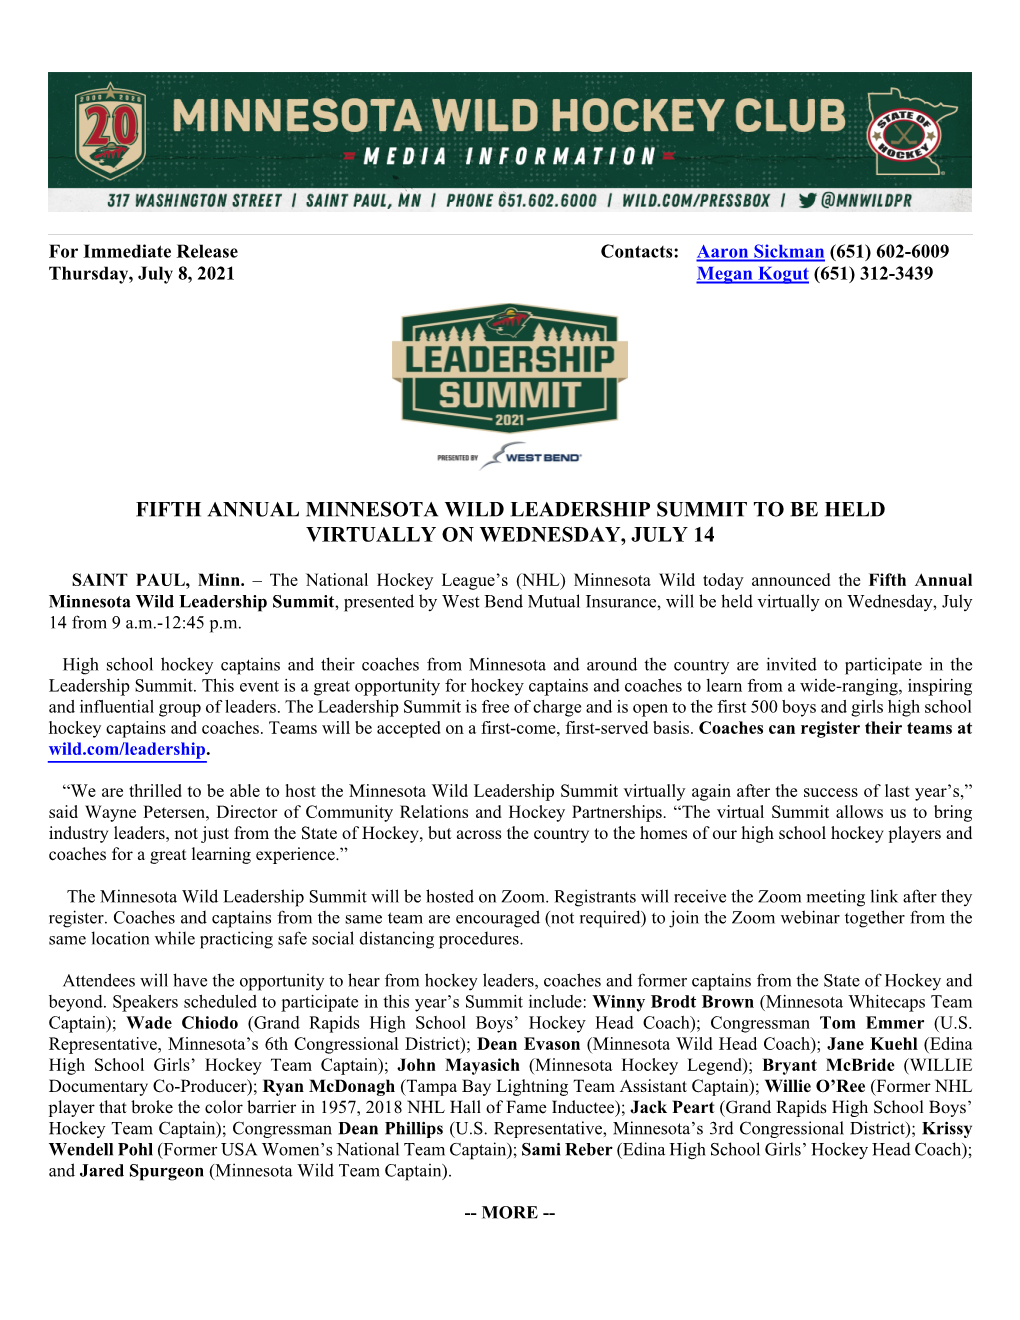 Fifth Annual Minnesota Wild Leadership Summit to Be Held Virtually on Wednesday, July 14